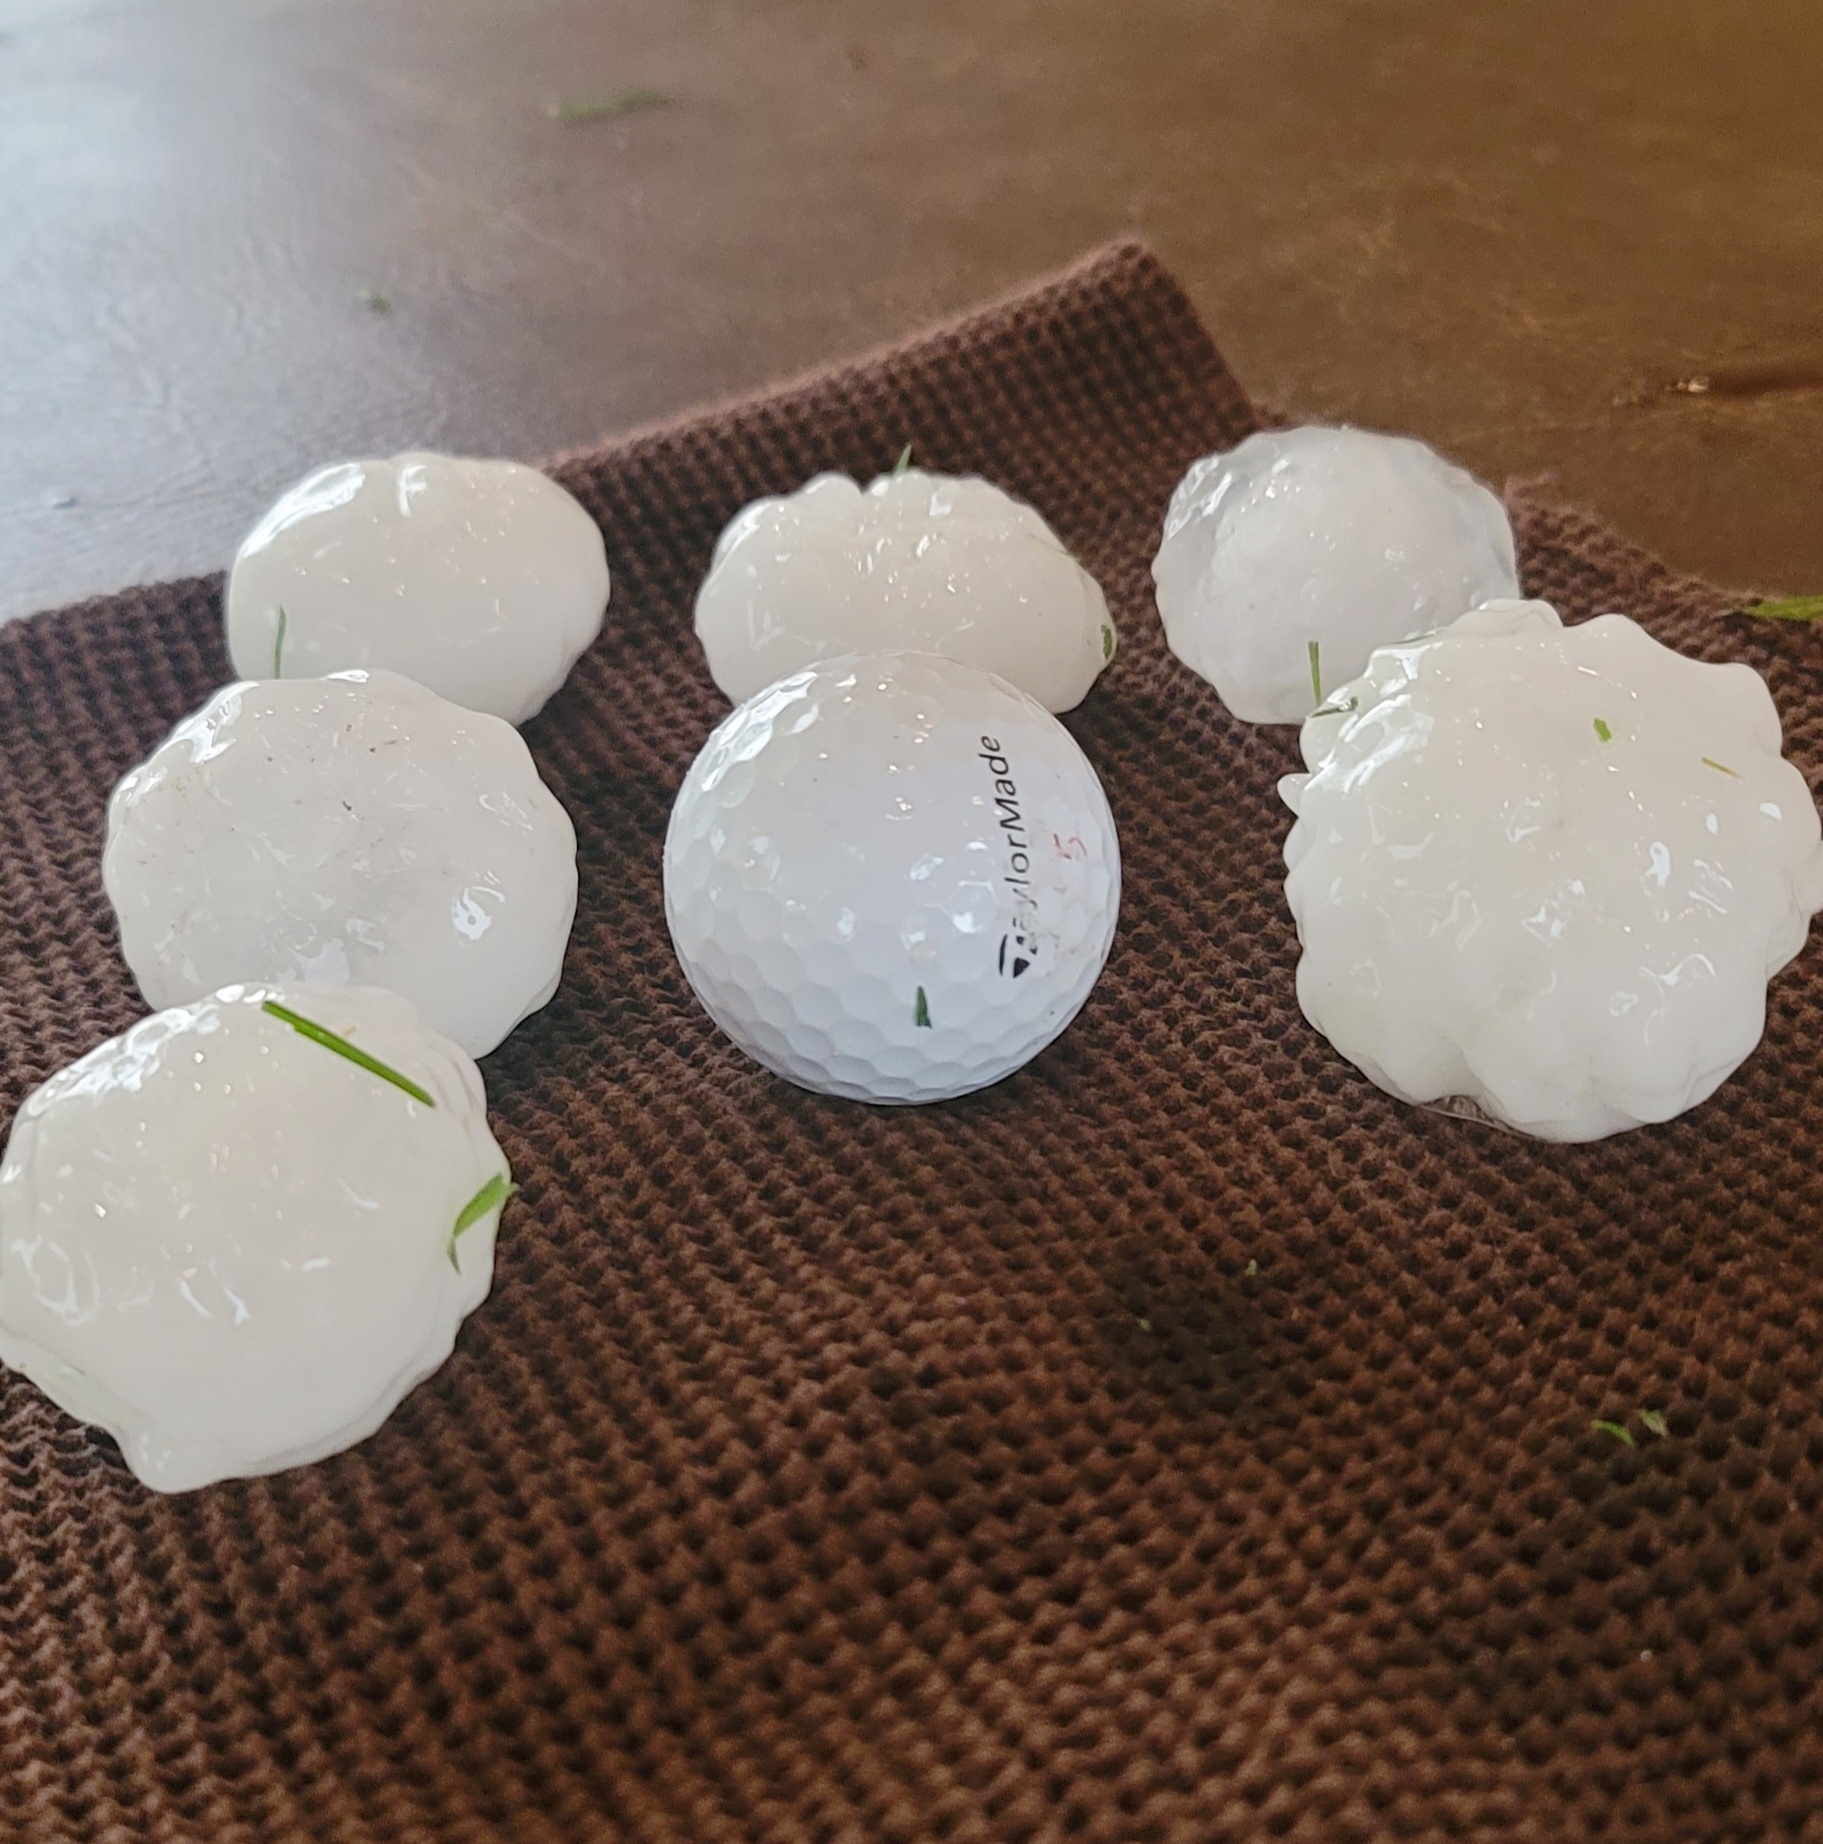 Large hail that fell in Denver City Sunday evening (1 May 2022). The image is courtesy of Charlie Espinoza and KAMC.